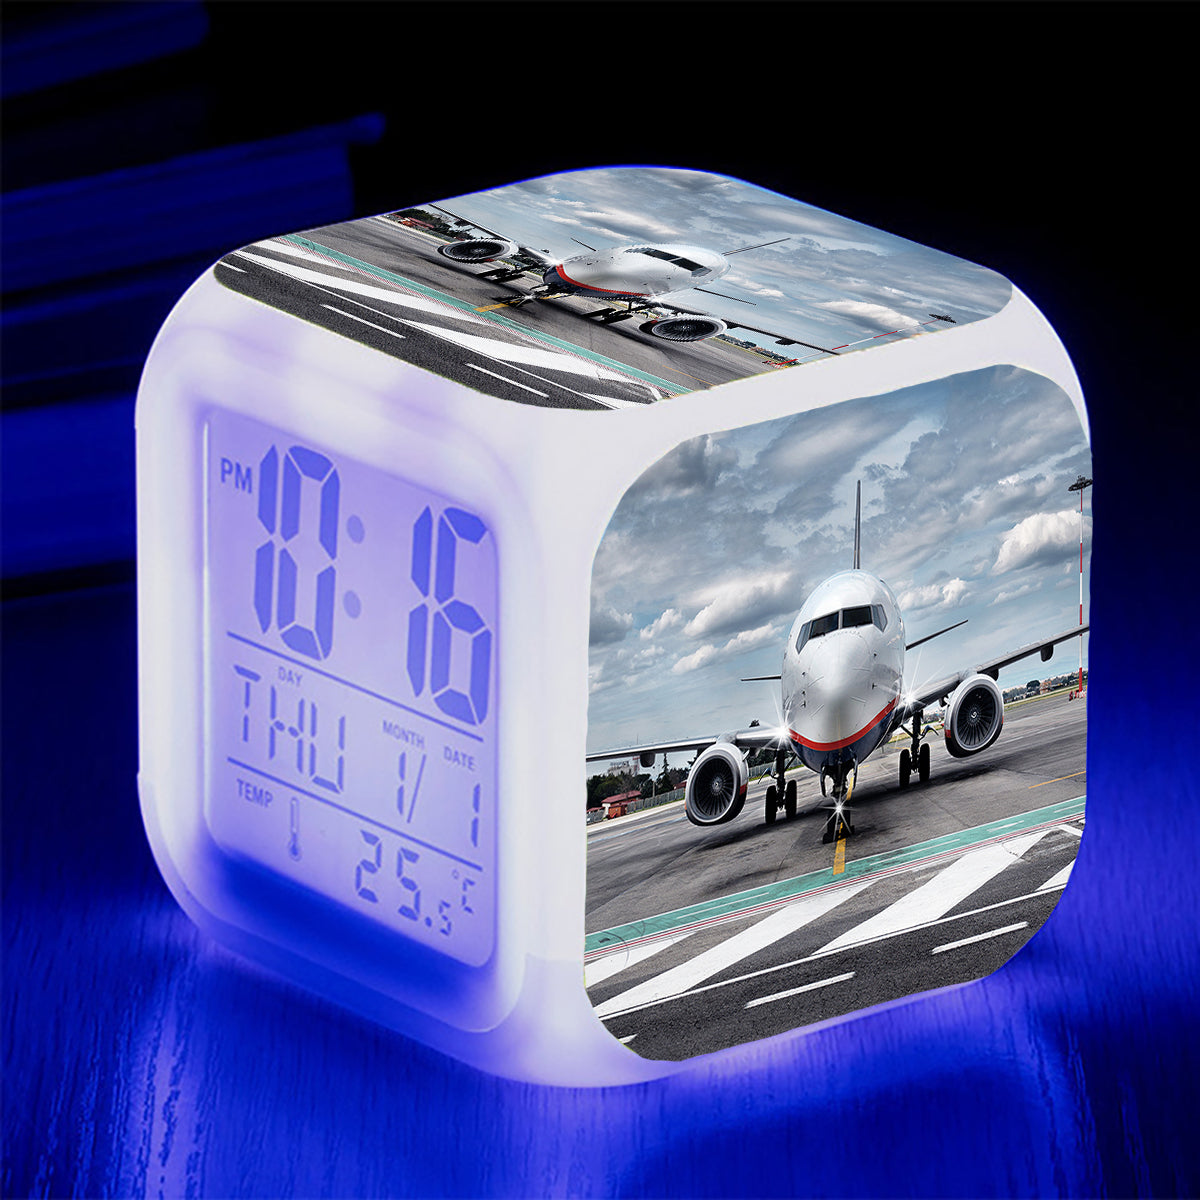 Amazing Clouds and Boeing 737 NG Designed "7 Colour" Digital Alarm Clock